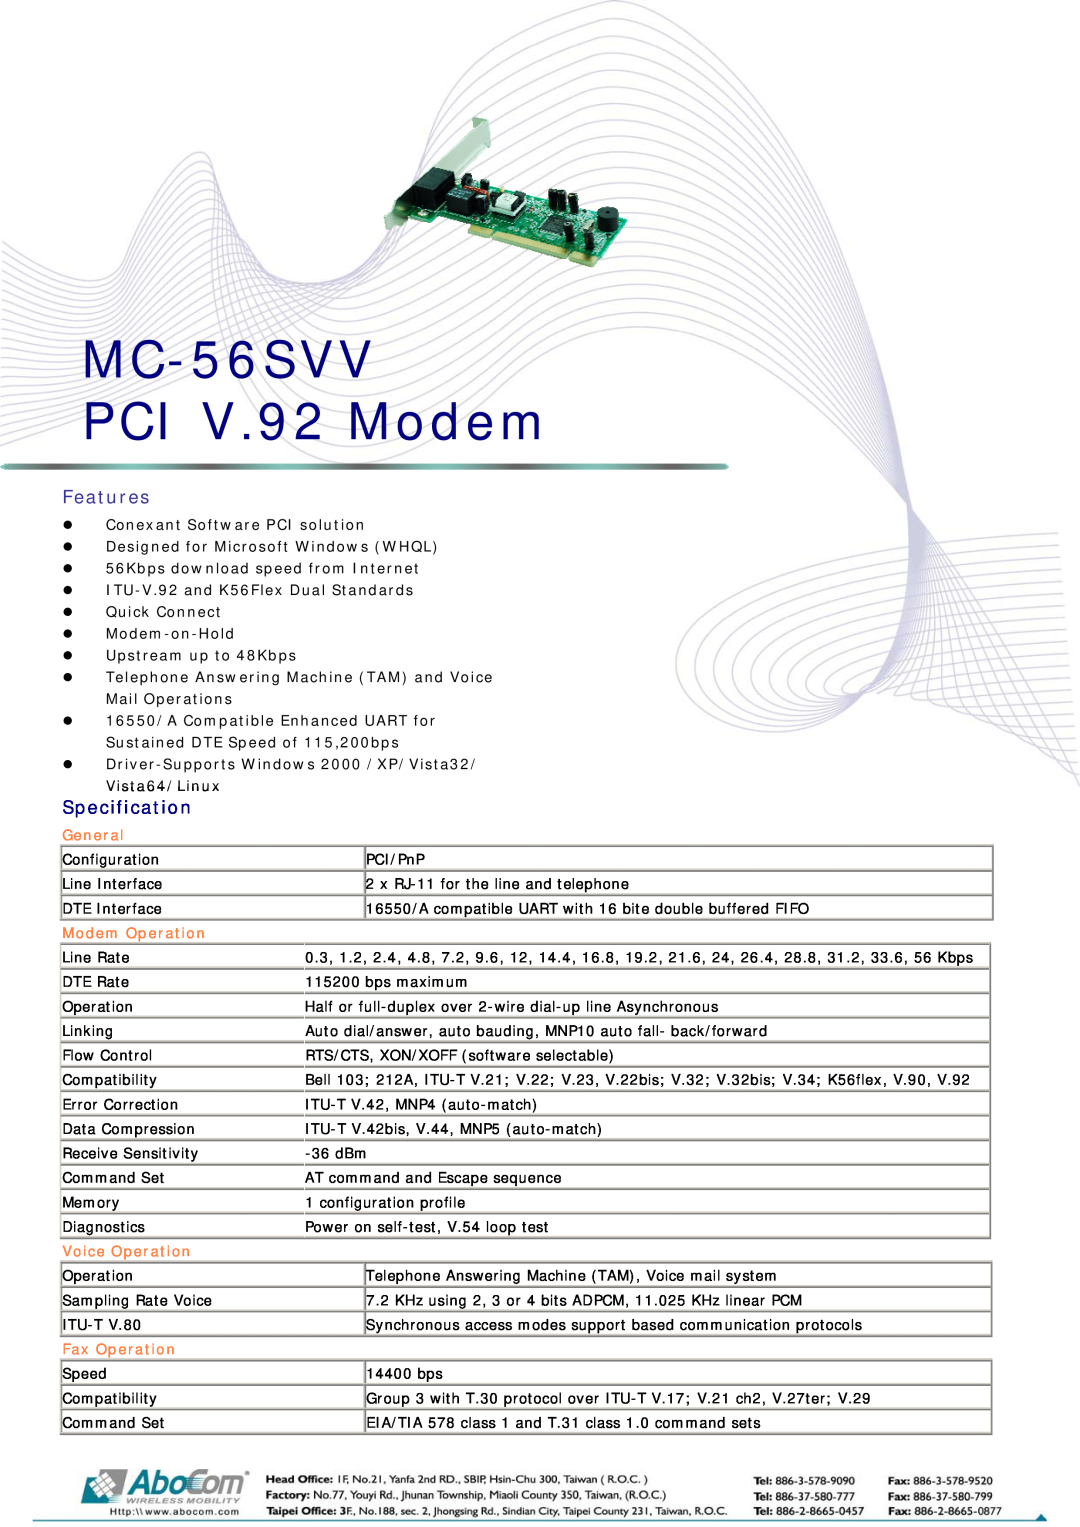 Abocom manual MC-56SVV PCI V.92 Modem, Features, Specification, z Conexant Software PCI solution, General 